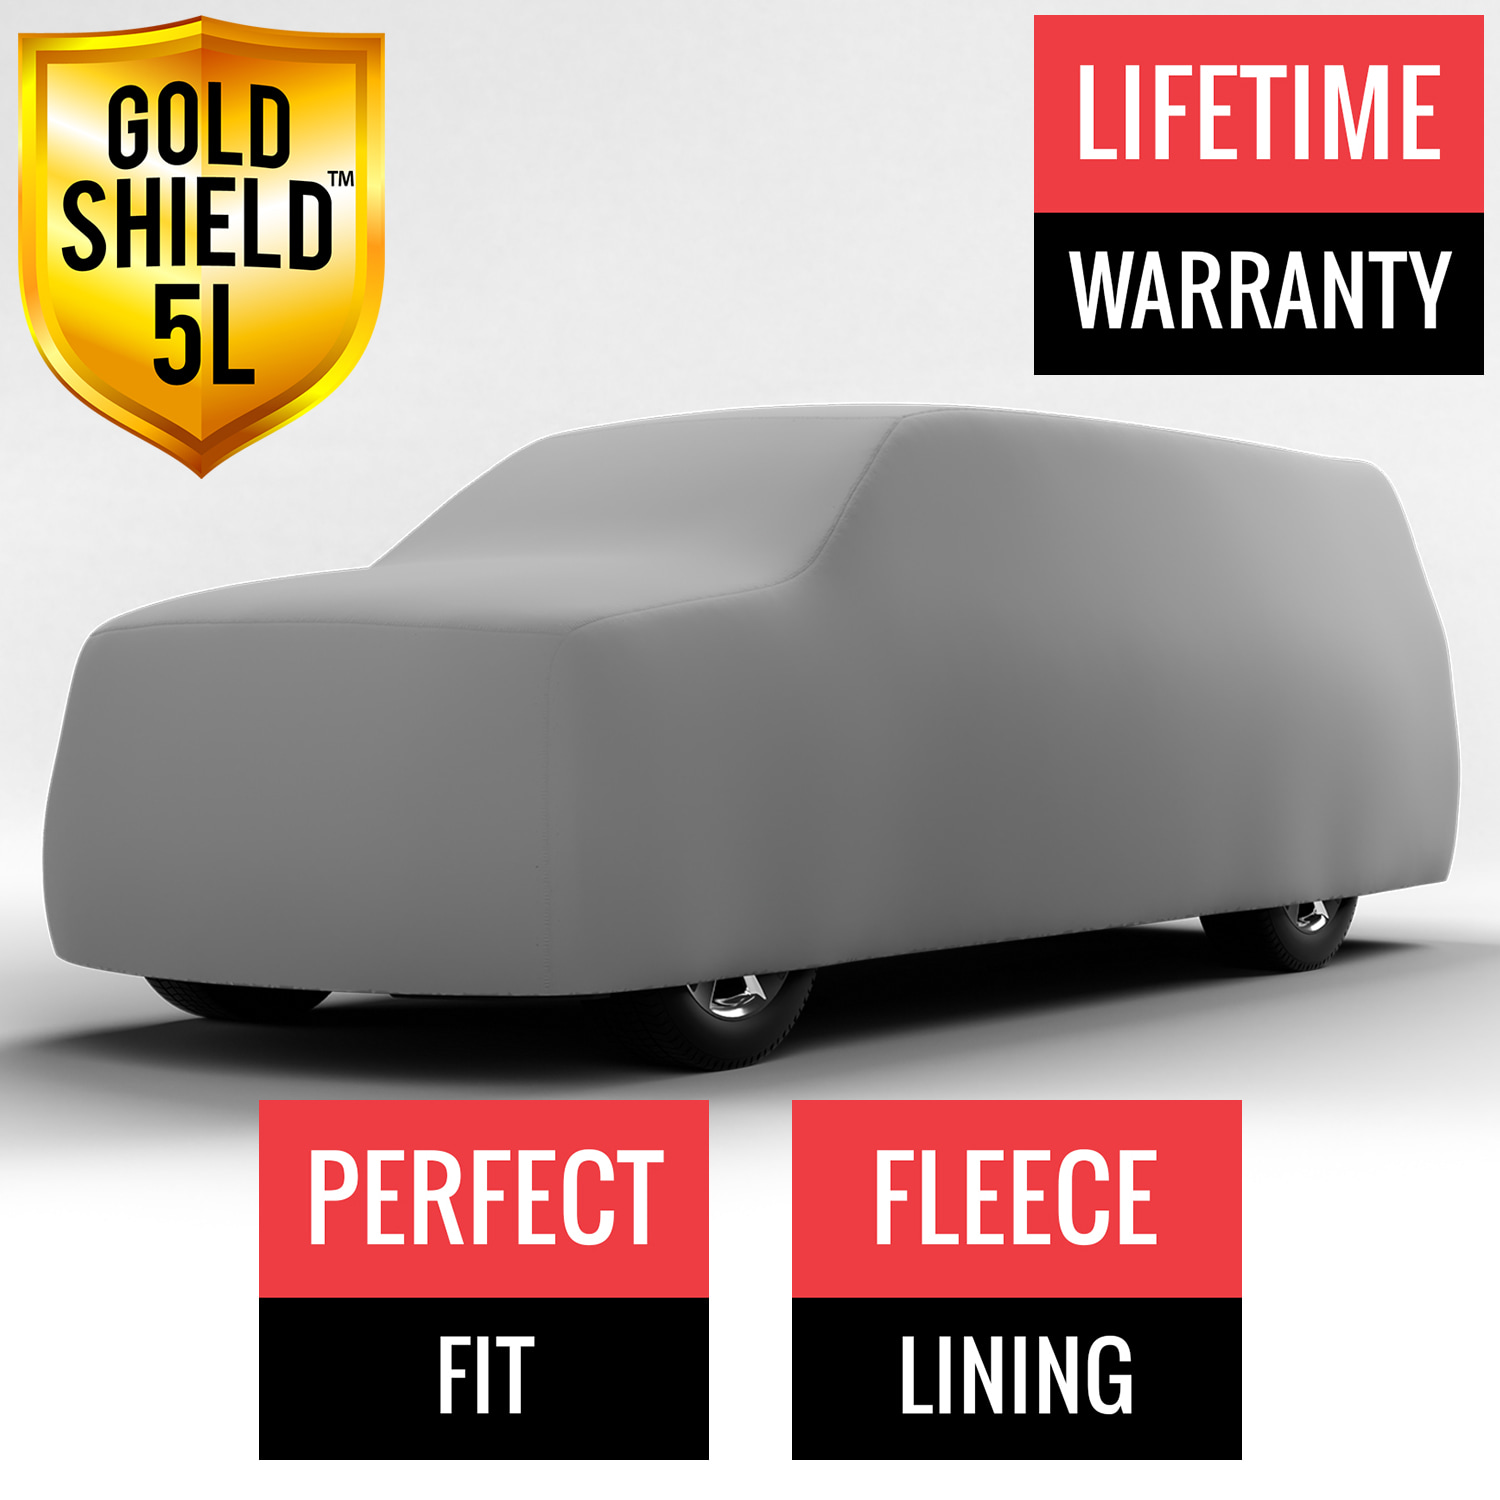 Gold Shield 5L - Car Cover for Dodge Ram 1500 SRT-10 2006 Quad Cab Pickup 6.5 Feet Bed with Camper Shell